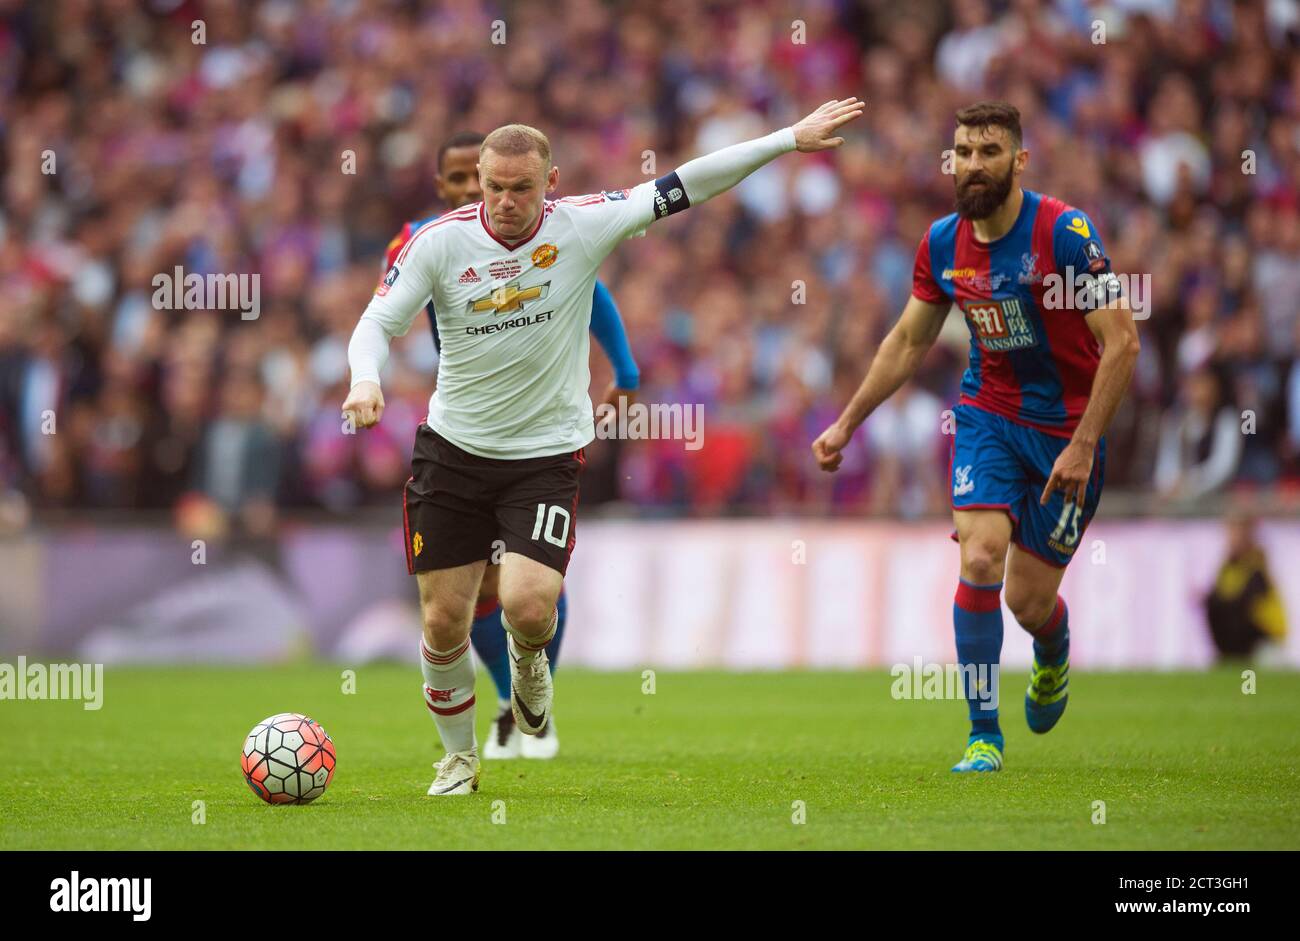 WAYNE ROONEY Crystal Palace / Manchester United FA Cup final - Stade Wembley. Photo : © Mark pain / Alamy Banque D'Images